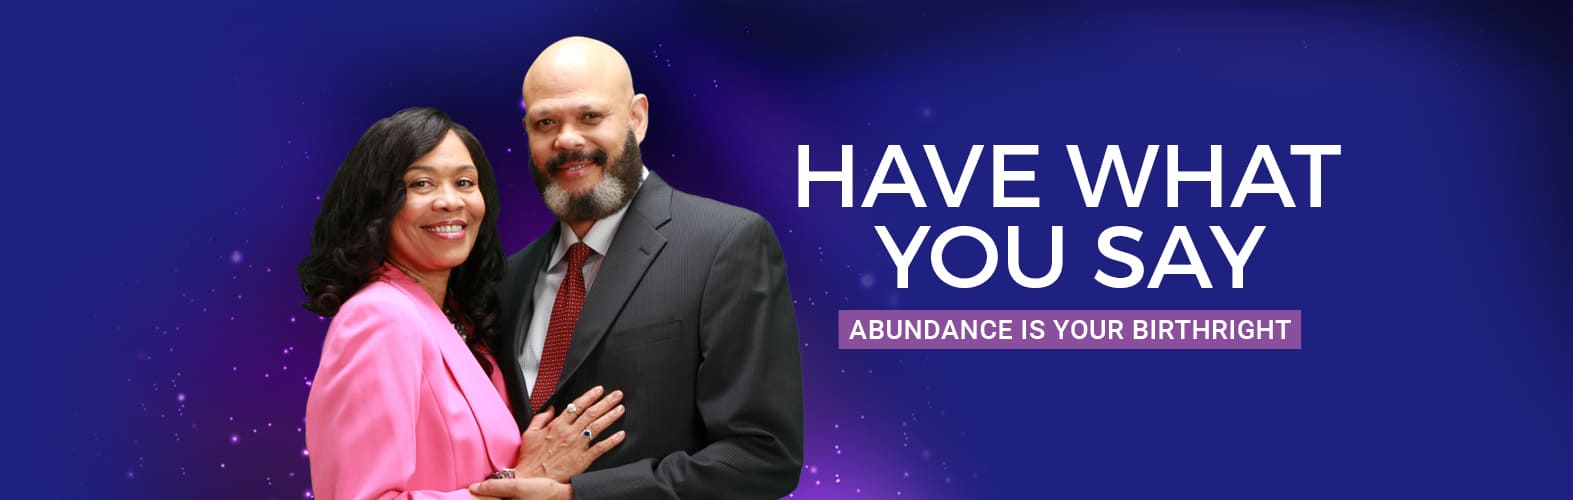 Havewhatyousay - Abundance is your Birthright